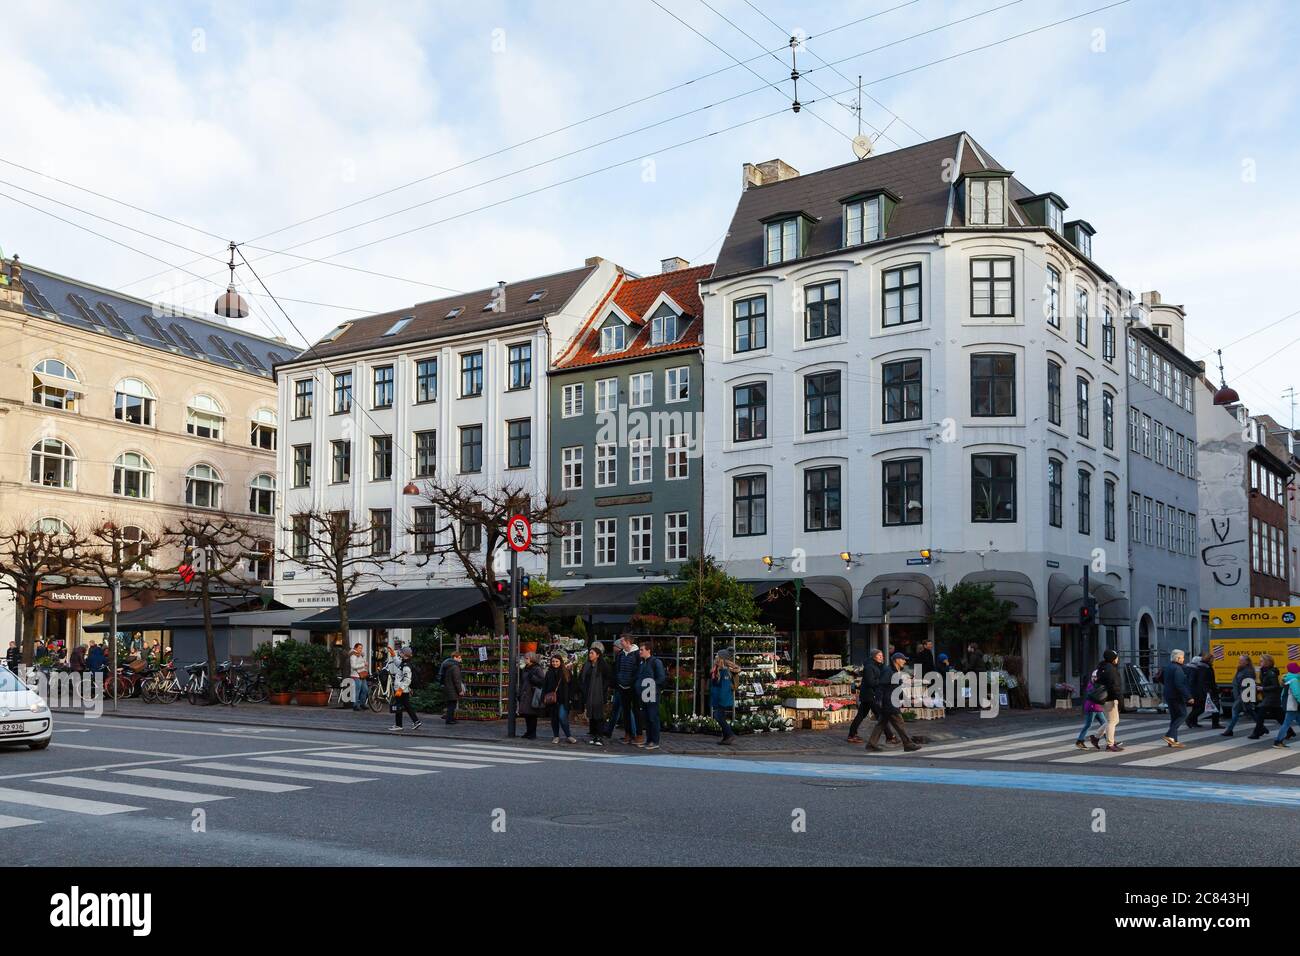 Copenhagen, Denmark - December 9, 2017: Street view of the Magasins Torv, city square with walking people at winter day Stock Photo